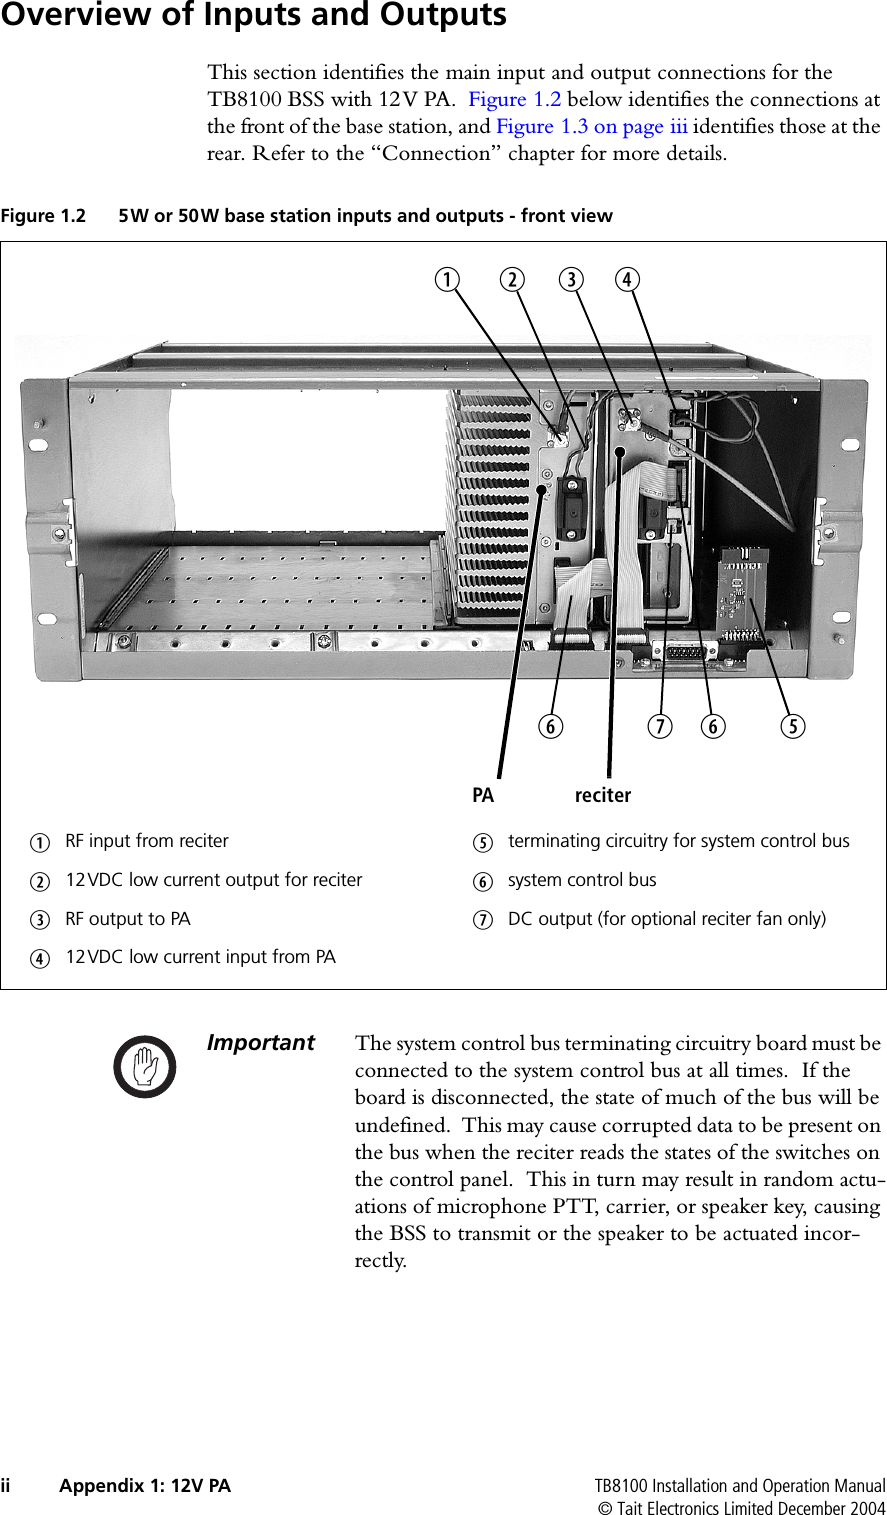  ii Appendix 1: 12V PA TB8100 Installation and Operation Manual© Tait Electronics Limited December 2004Overview of Inputs and OutputsThis section identifies the main input and output connections for the TB8100 BSS with 12V PA.  Figure 1.2 below identifies the connections at the front of the base station, and Figure 1.3 on page iii identifies those at the rear. Refer to the “Connection” chapter for more details.Important The system control bus terminating circuitry board must be connected to the system control bus at all times.  If the board is disconnected, the state of much of the bus will be undefined.  This may cause corrupted data to be present on the bus when the reciter reads the states of the switches on the control panel.  This in turn may result in random actu-ations of microphone PTT, carrier, or speaker key, causing the BSS to transmit or the speaker to be actuated incor-rectly.Figure 1.2 5W or 50W base station inputs and outputs - front viewbRF input from reciter fterminating circuitry for system control busc12VDC low current output for reciter gsystem control busdRF output to PA hDC output (for optional reciter fan only)e12VDC low current input from PAbdecgfghPA reciter